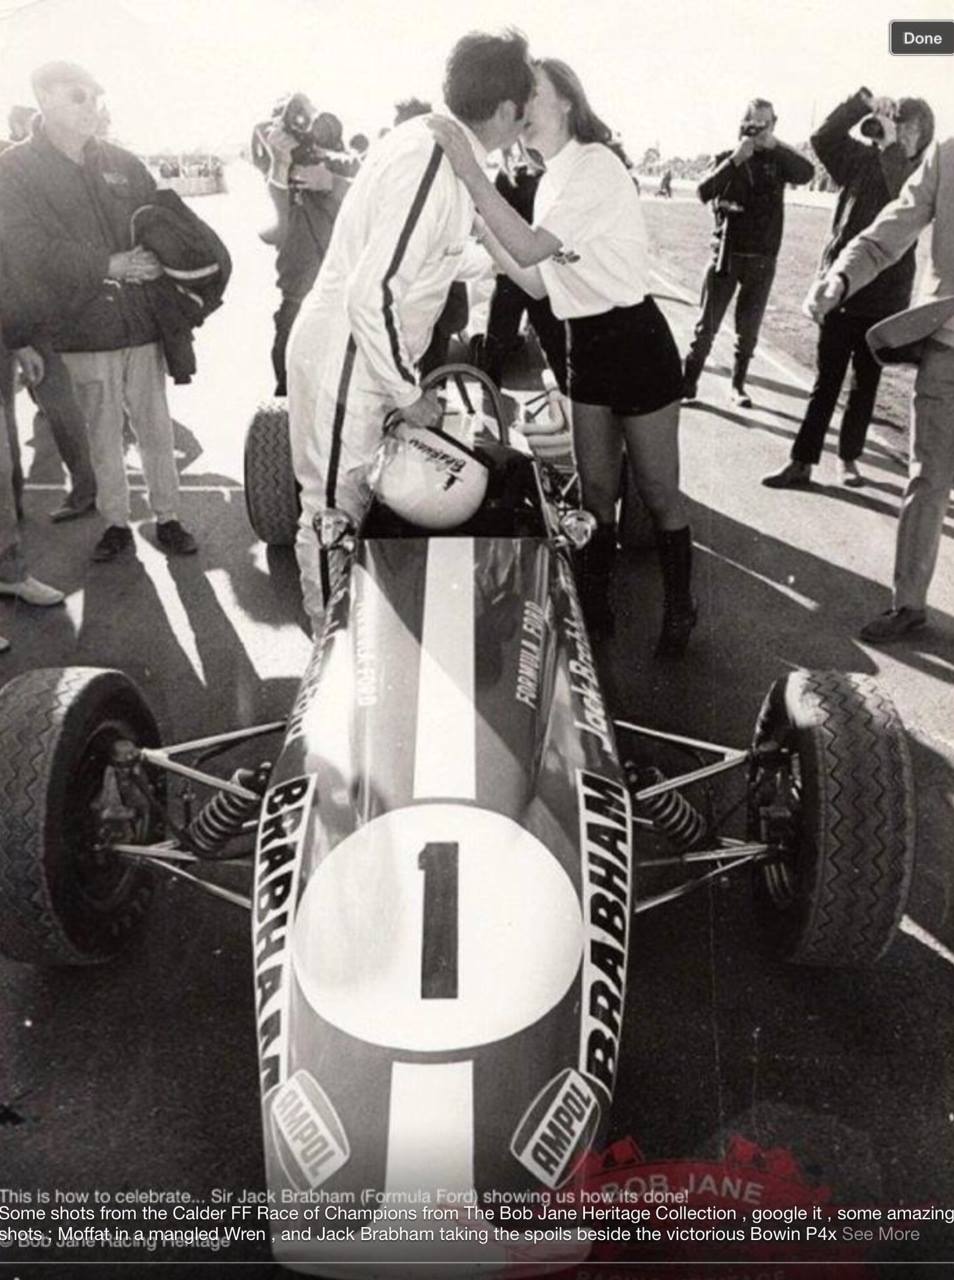 Jack Brabham at the Race of Champions in Calder, Australia, on 15 August 1971.